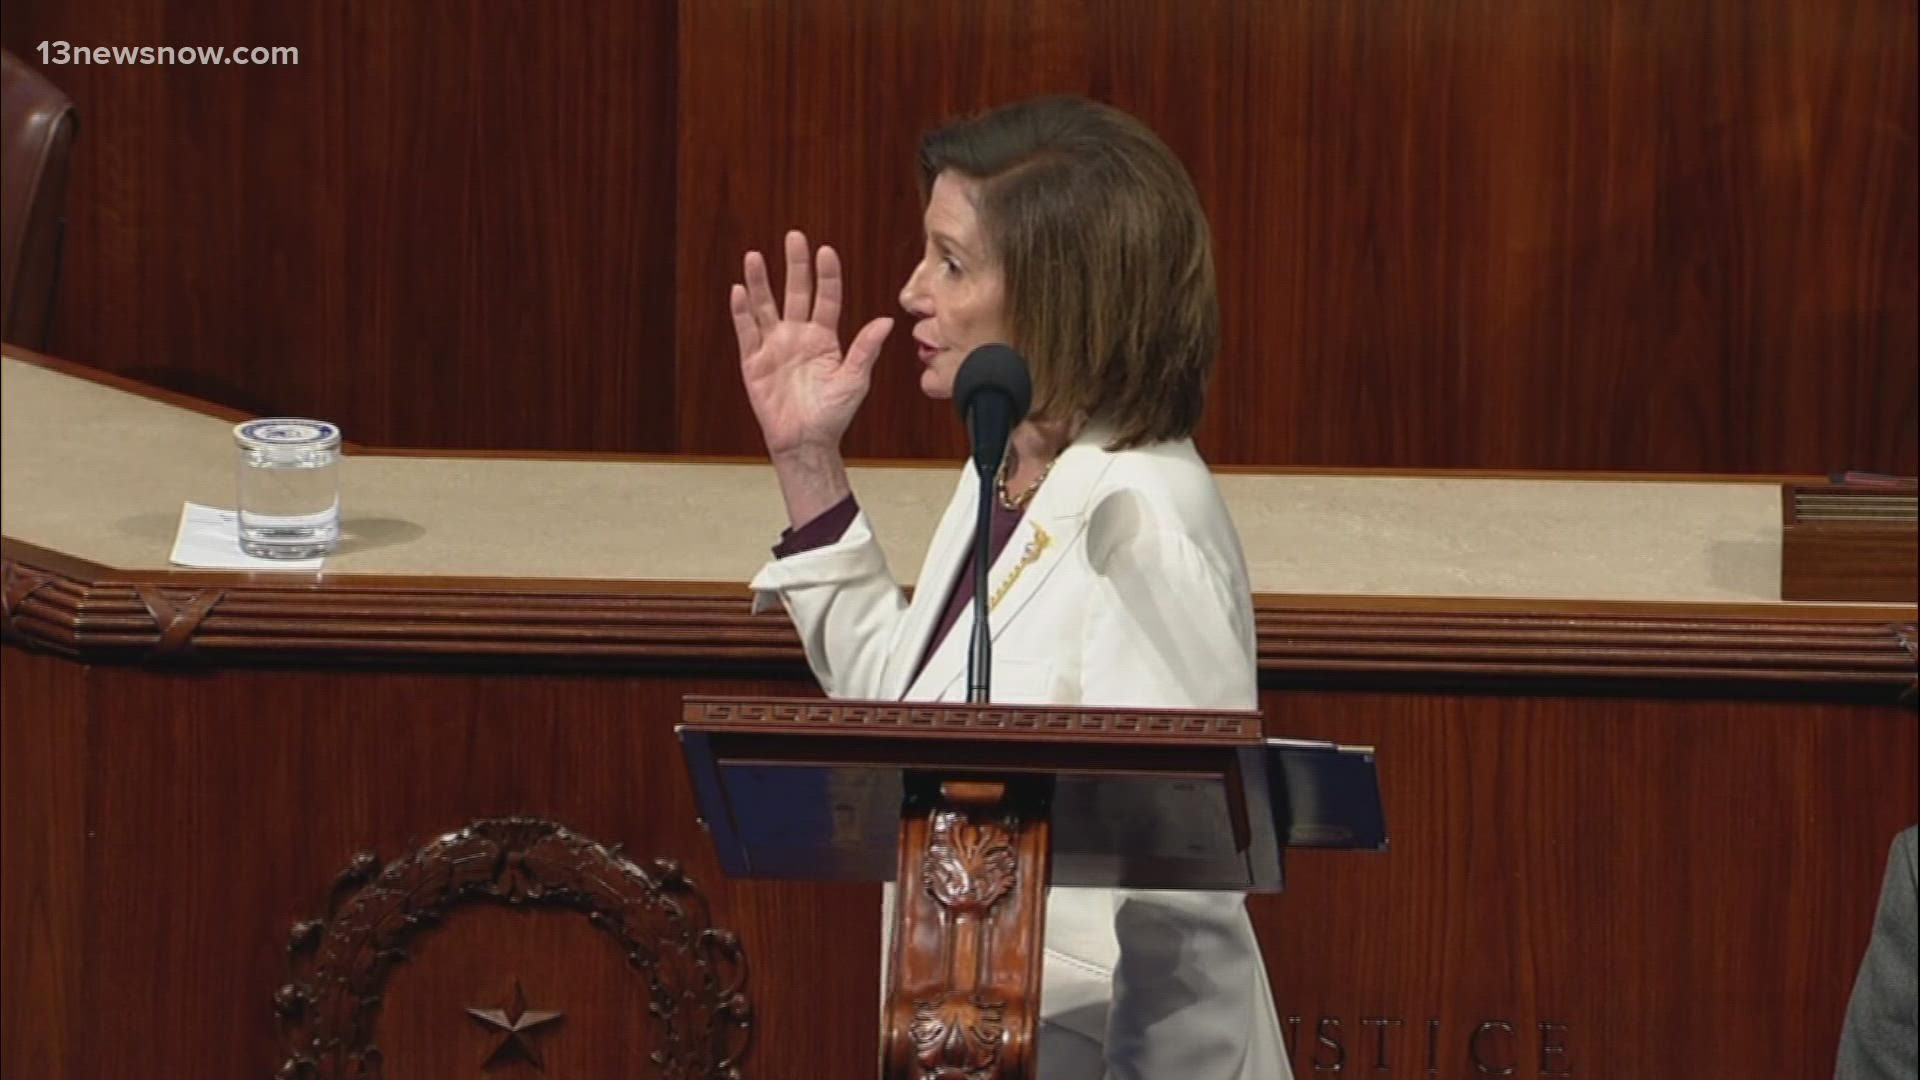 Pelosi announced in a spirited speech on the House floor that she will step aside after leading Democrats for nearly 20 years.